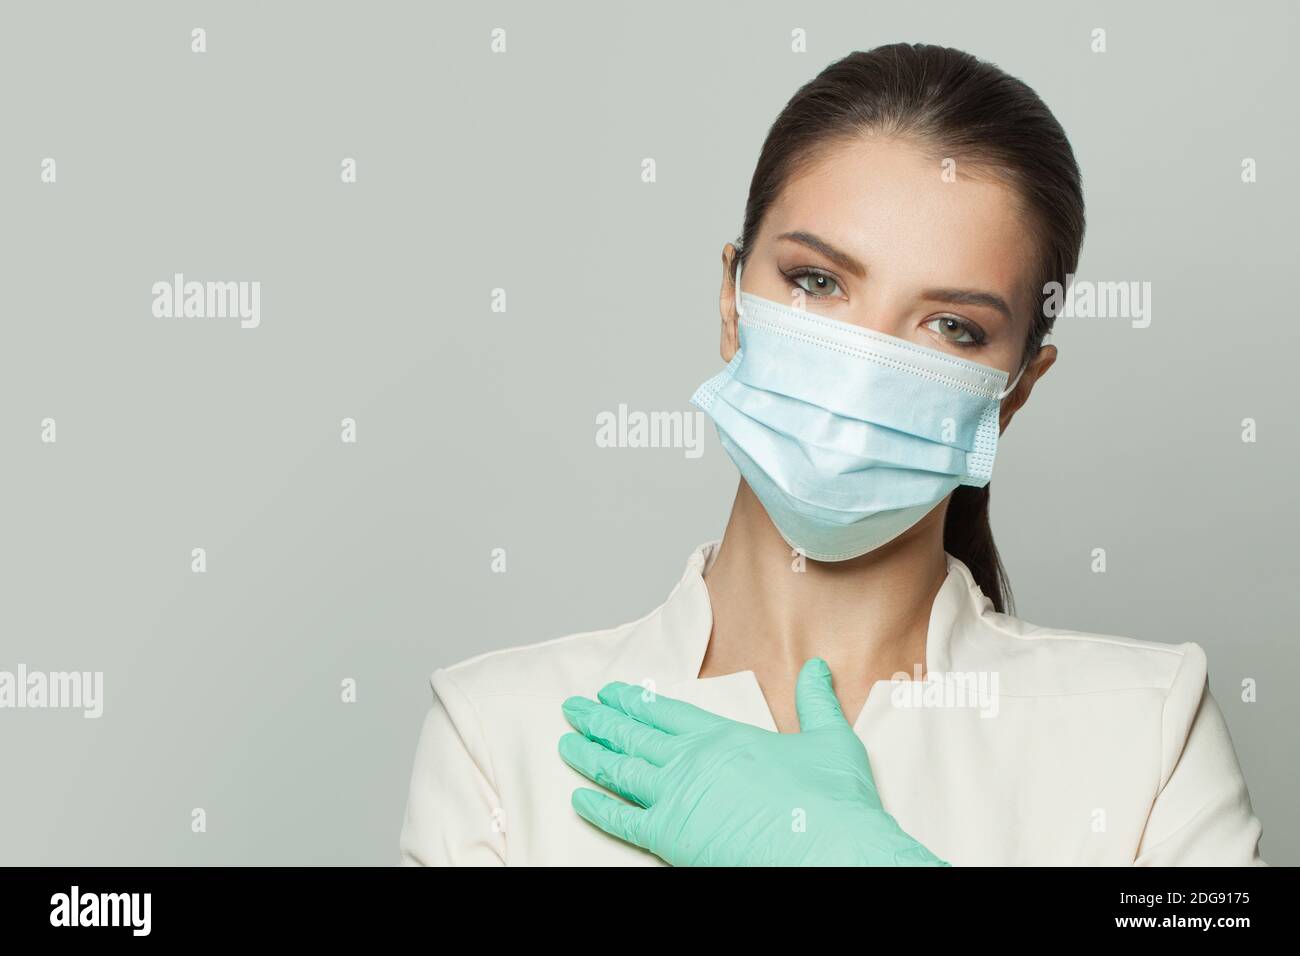 Friendly woman doctor in protective medical face mask. Medicine and cosmetology concept Stock Photo